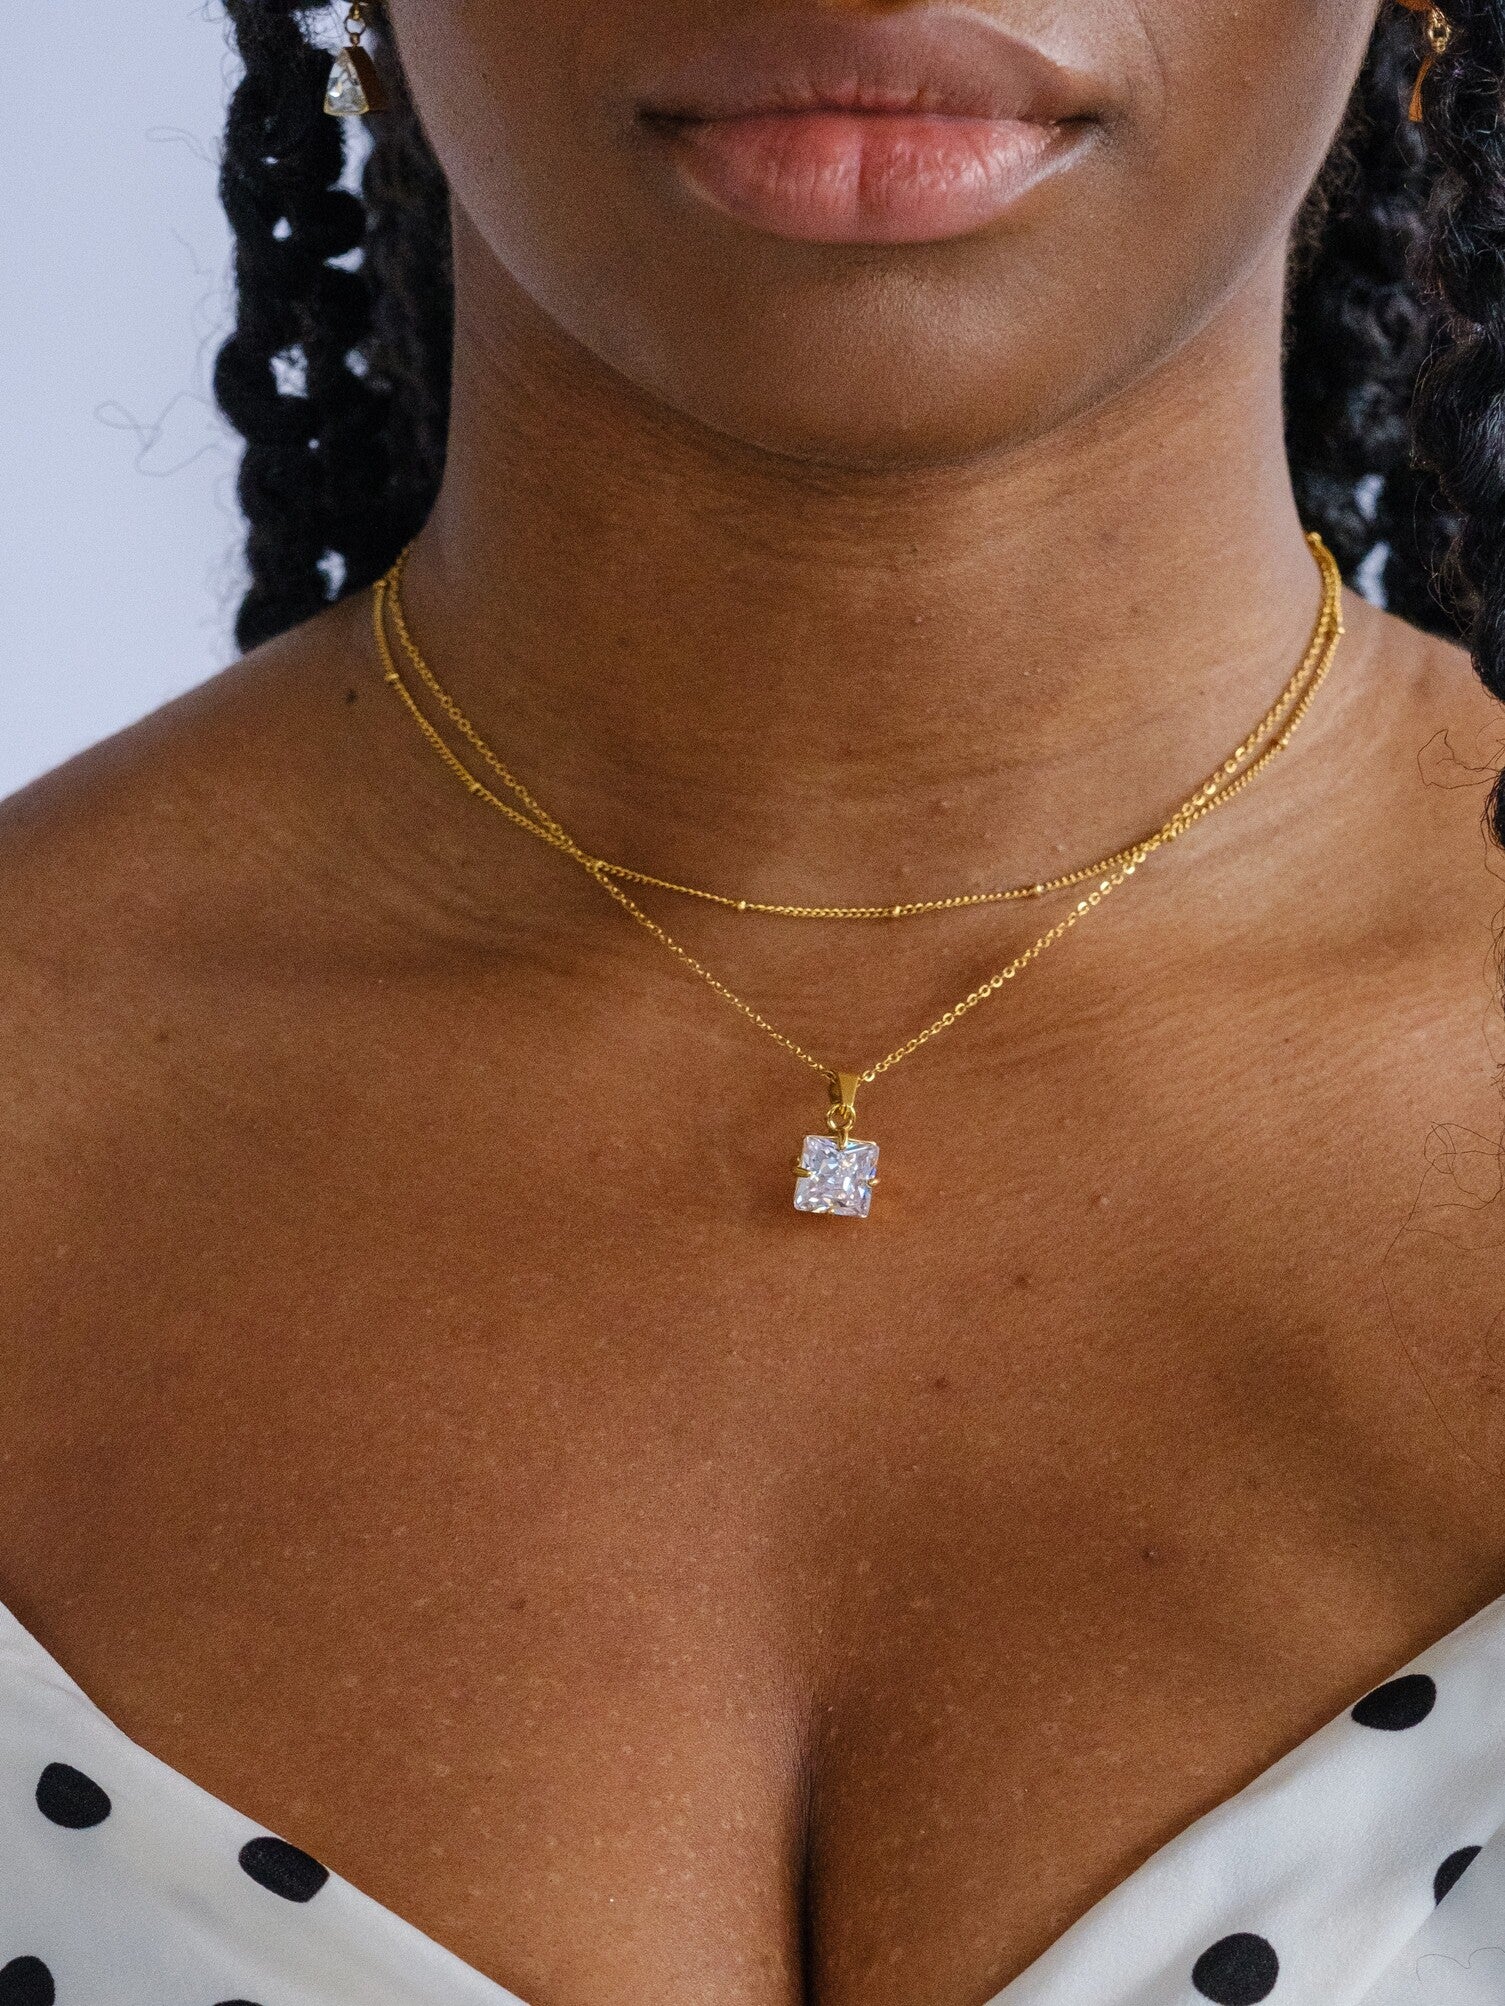 Woman wearing two necklaces. One is a gold satellite necklace at choker length and the other has a clear square crystal pendant and sits a bit lower